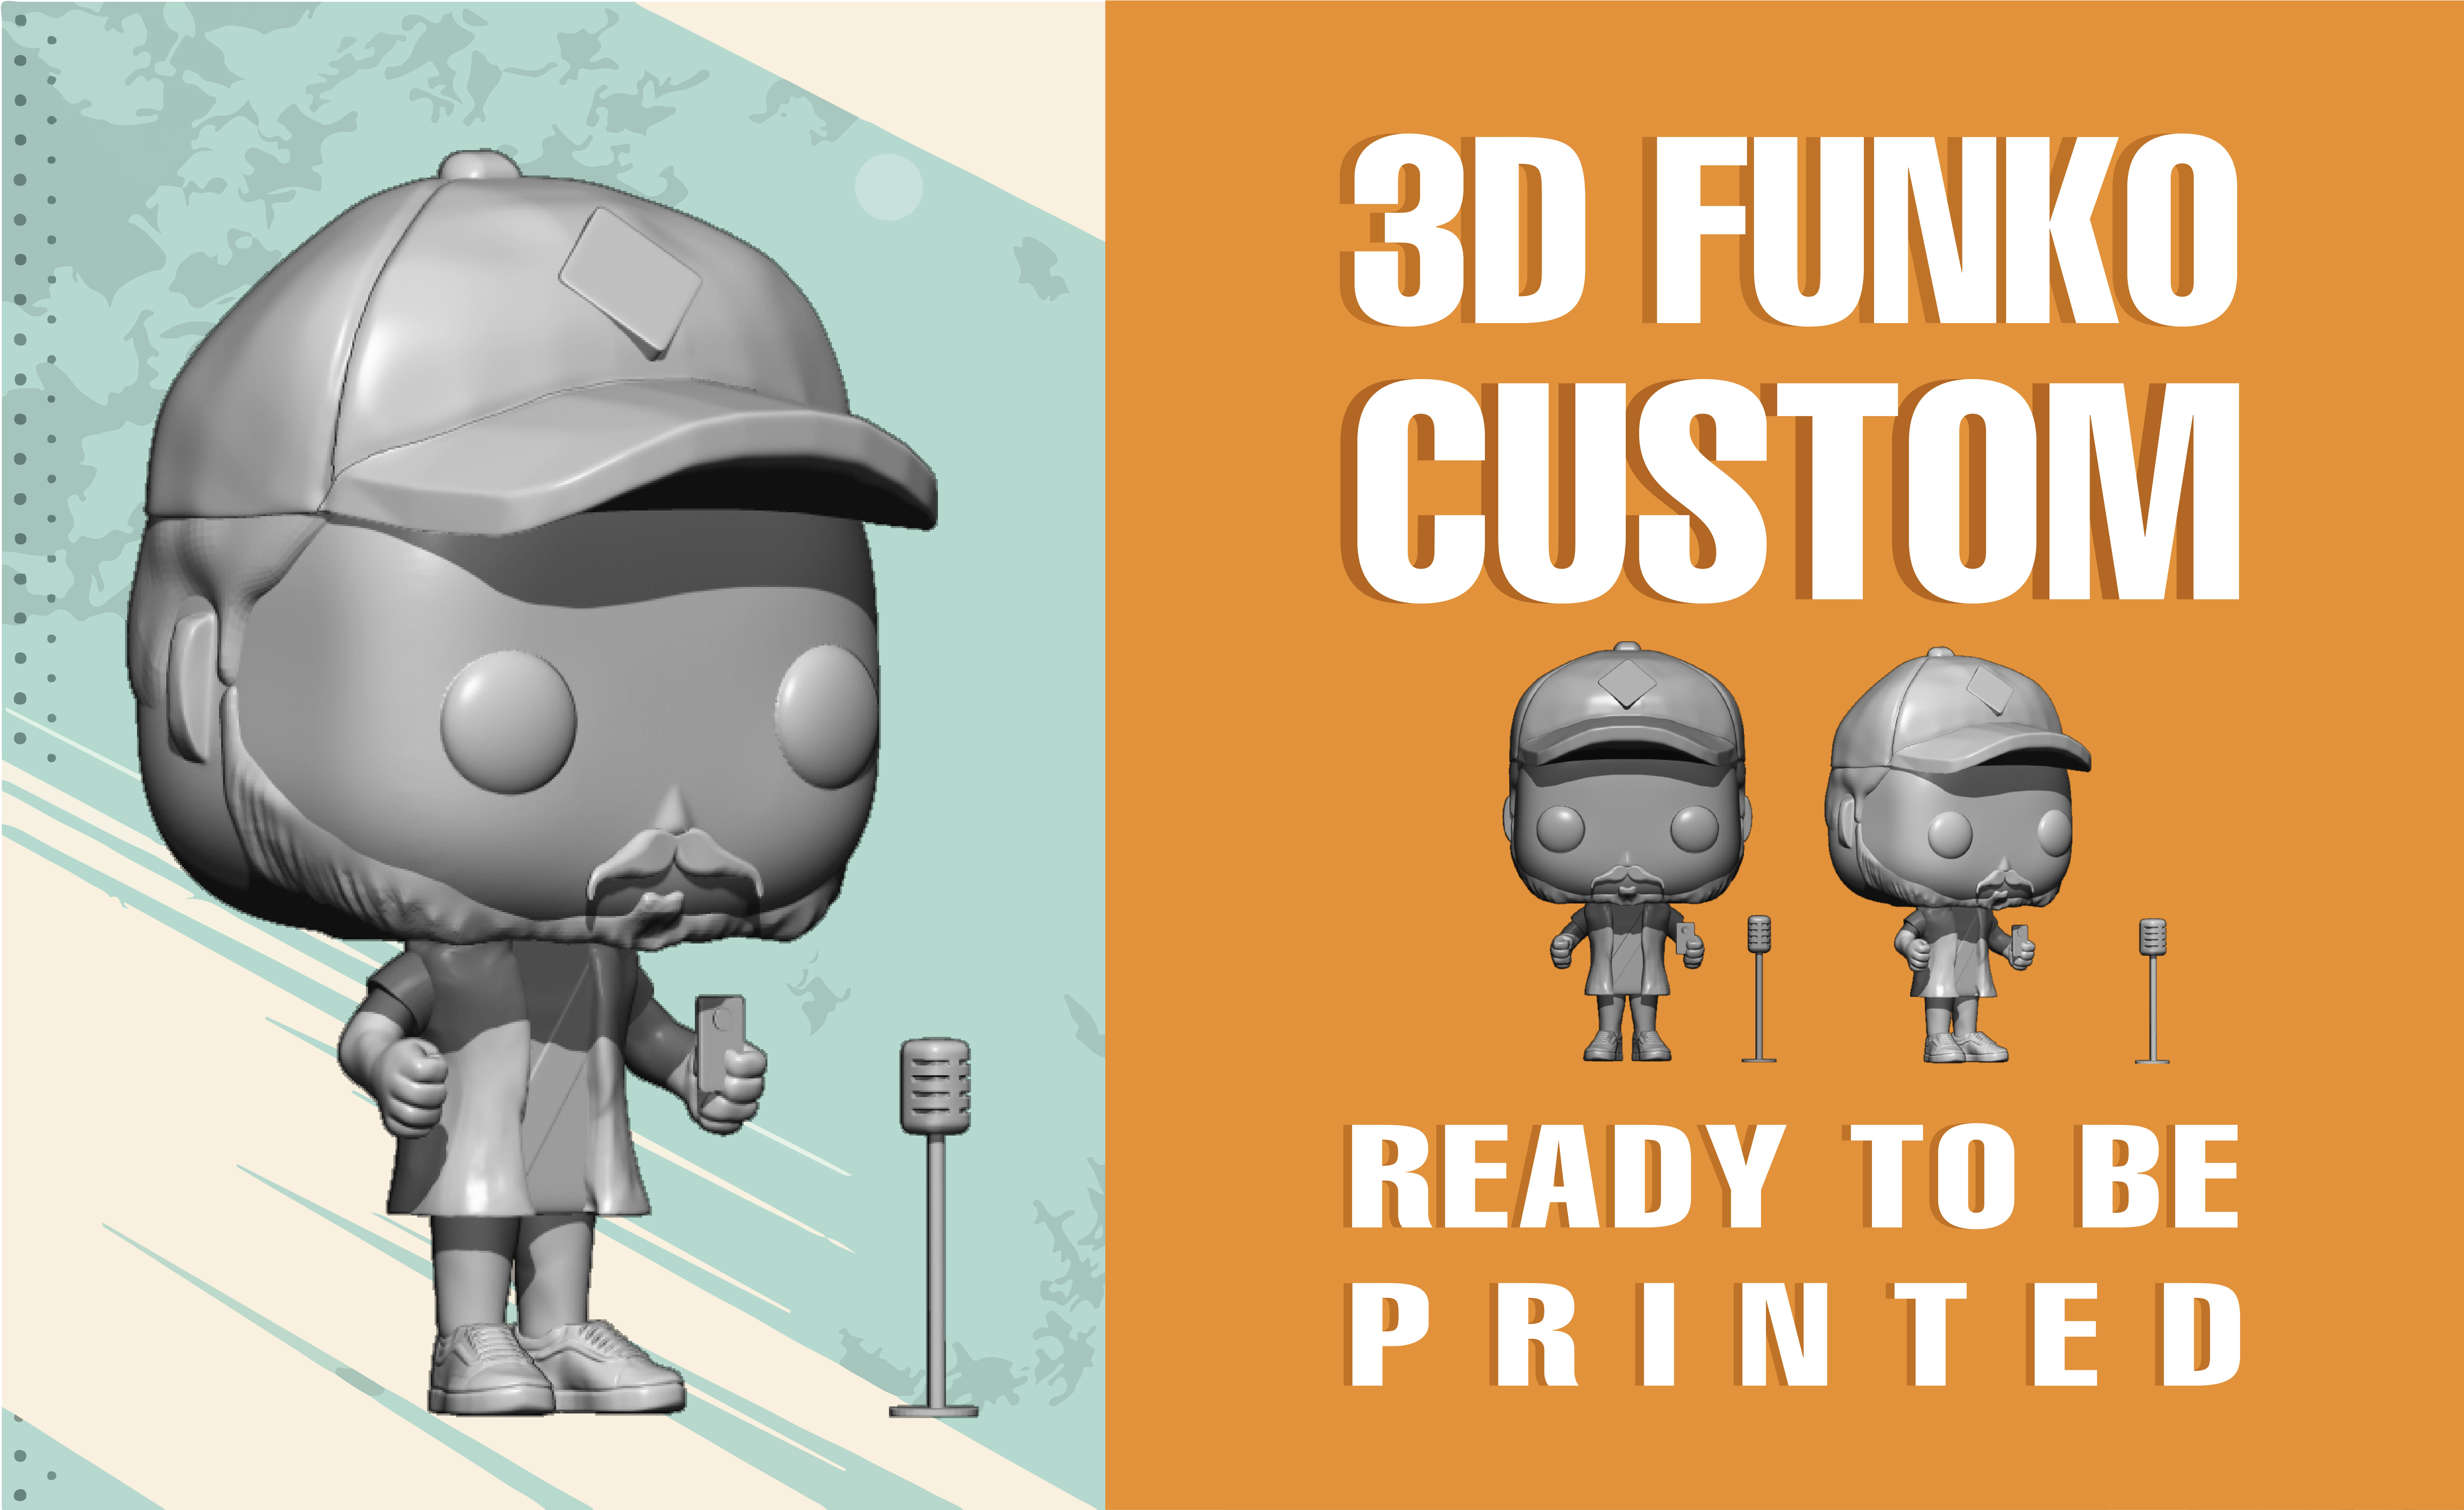 Arabiske Sarabo For det andet Rund Make your custom 3d funko pop that you want ready to be printed by  Jupoartist | Fiverr